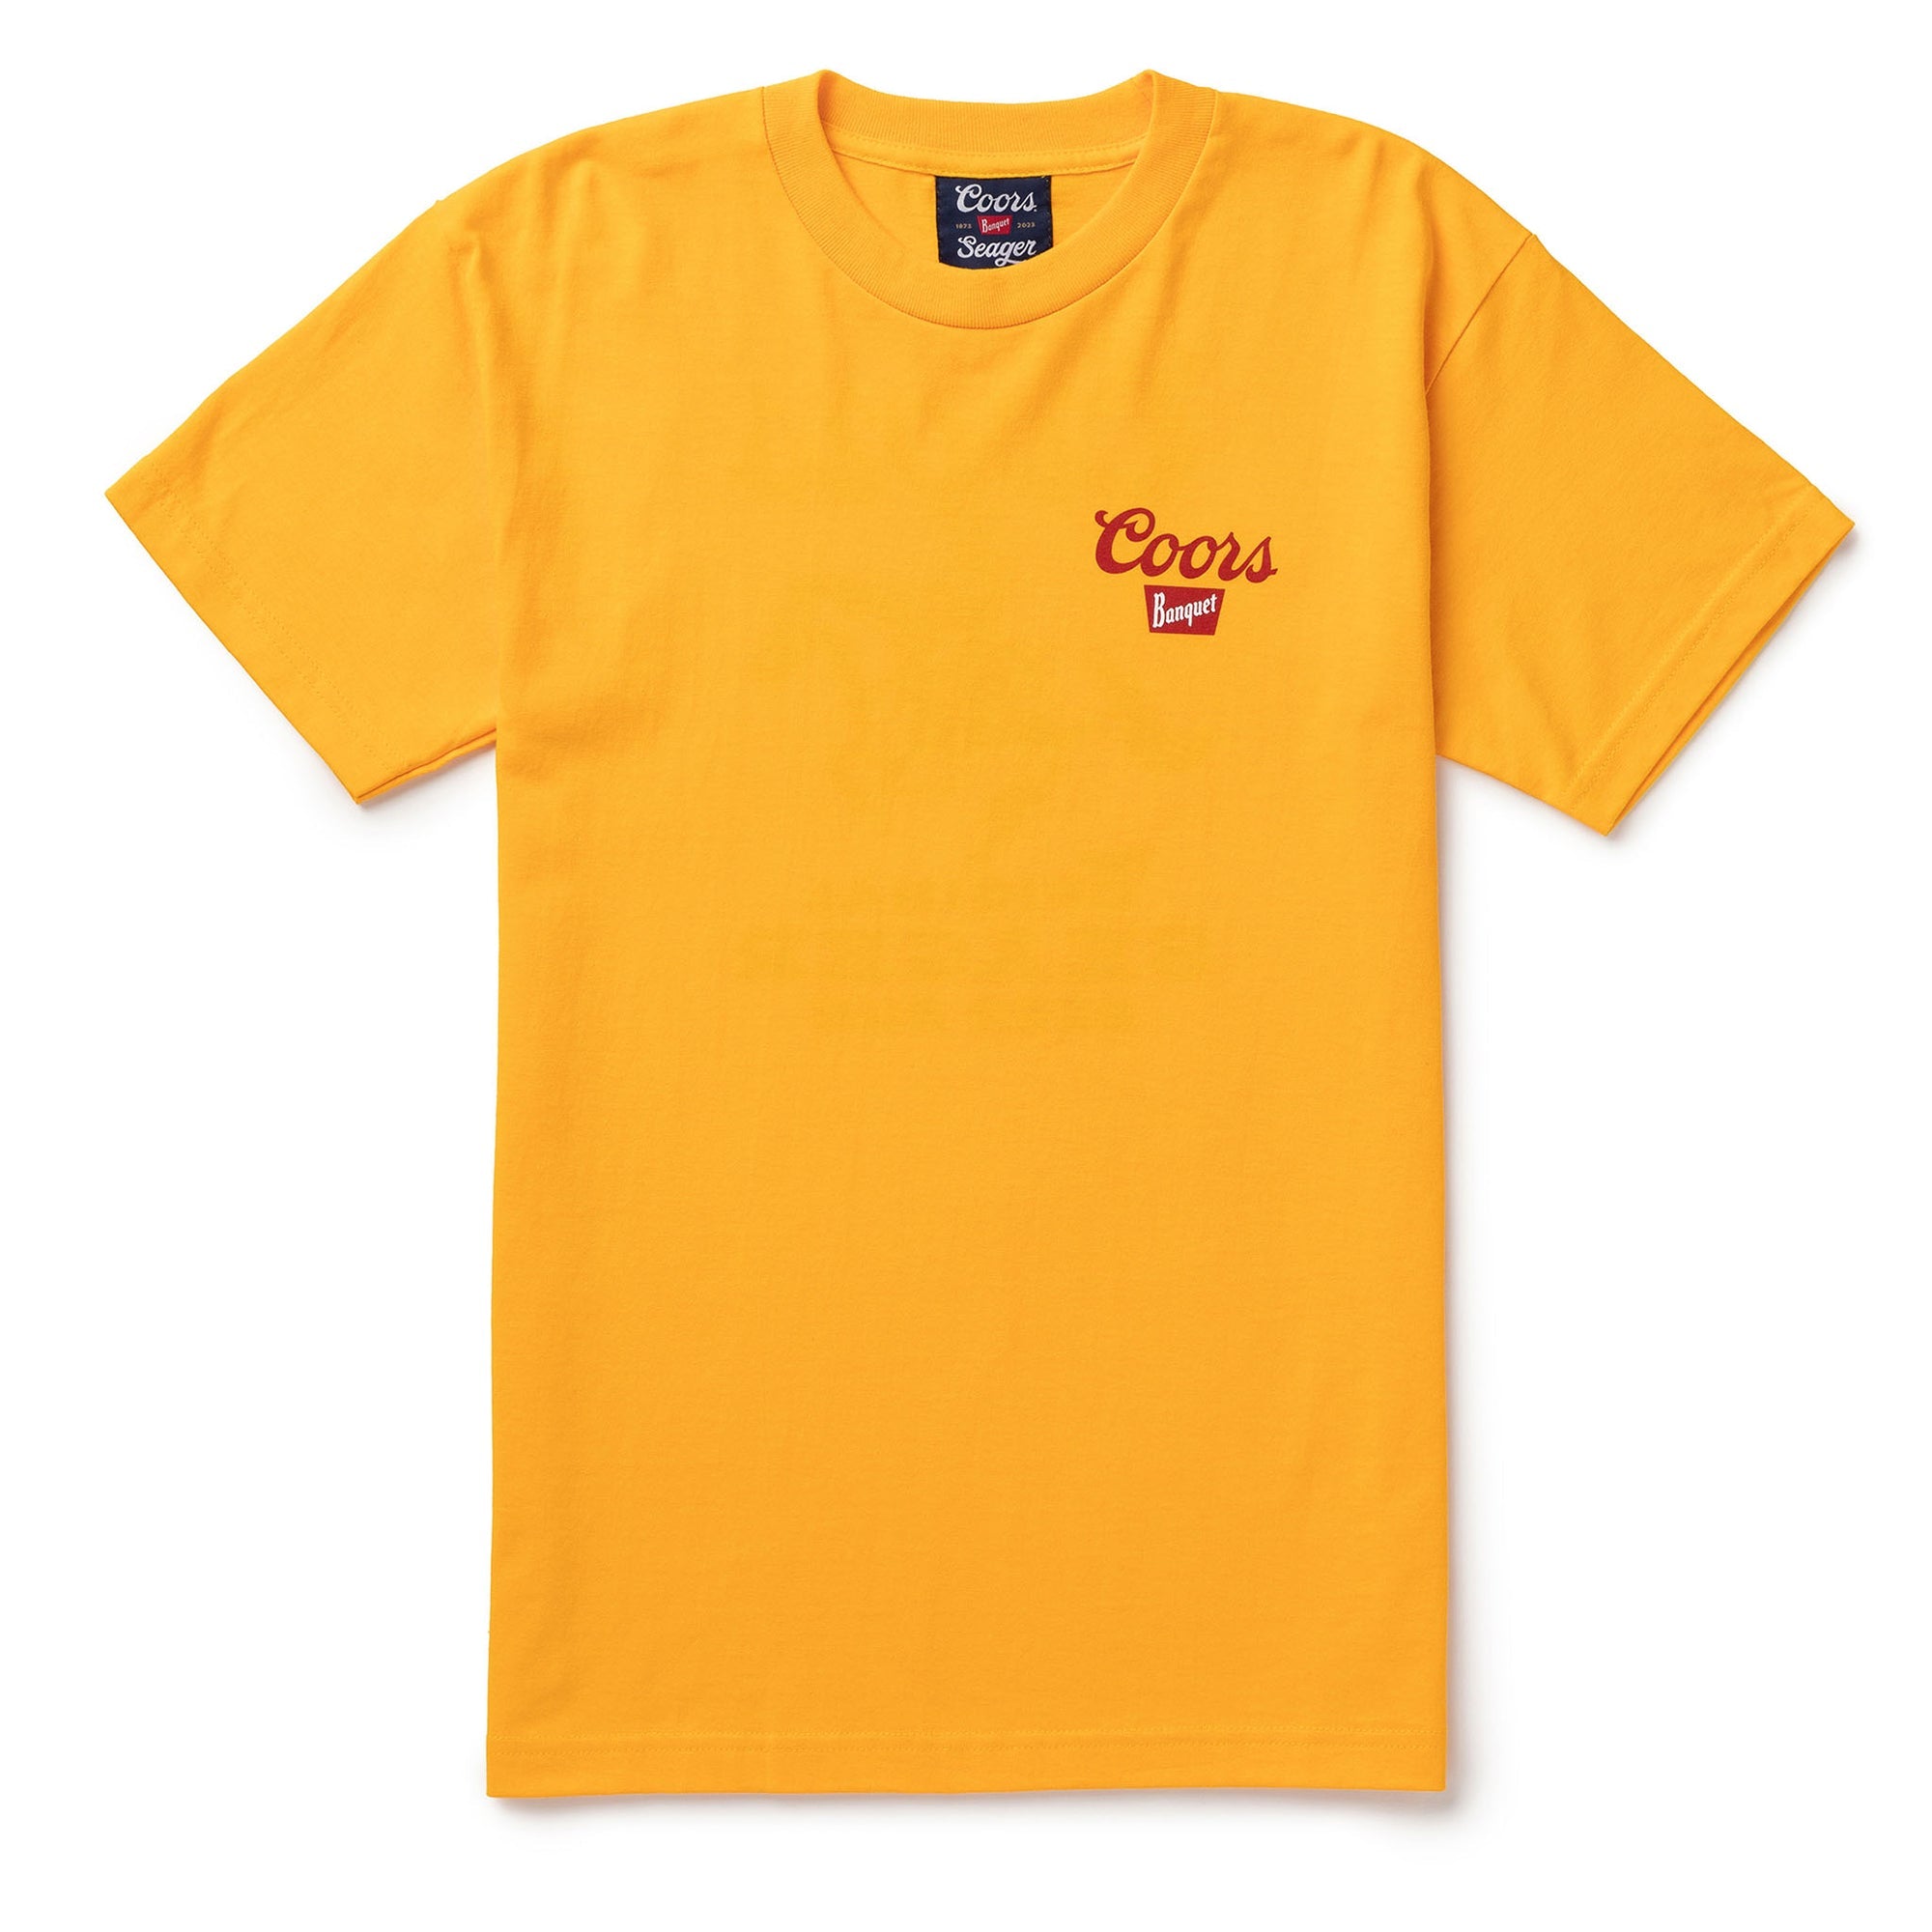 Seager x Coors Banquet Beer Run S/S Tee - Yellow